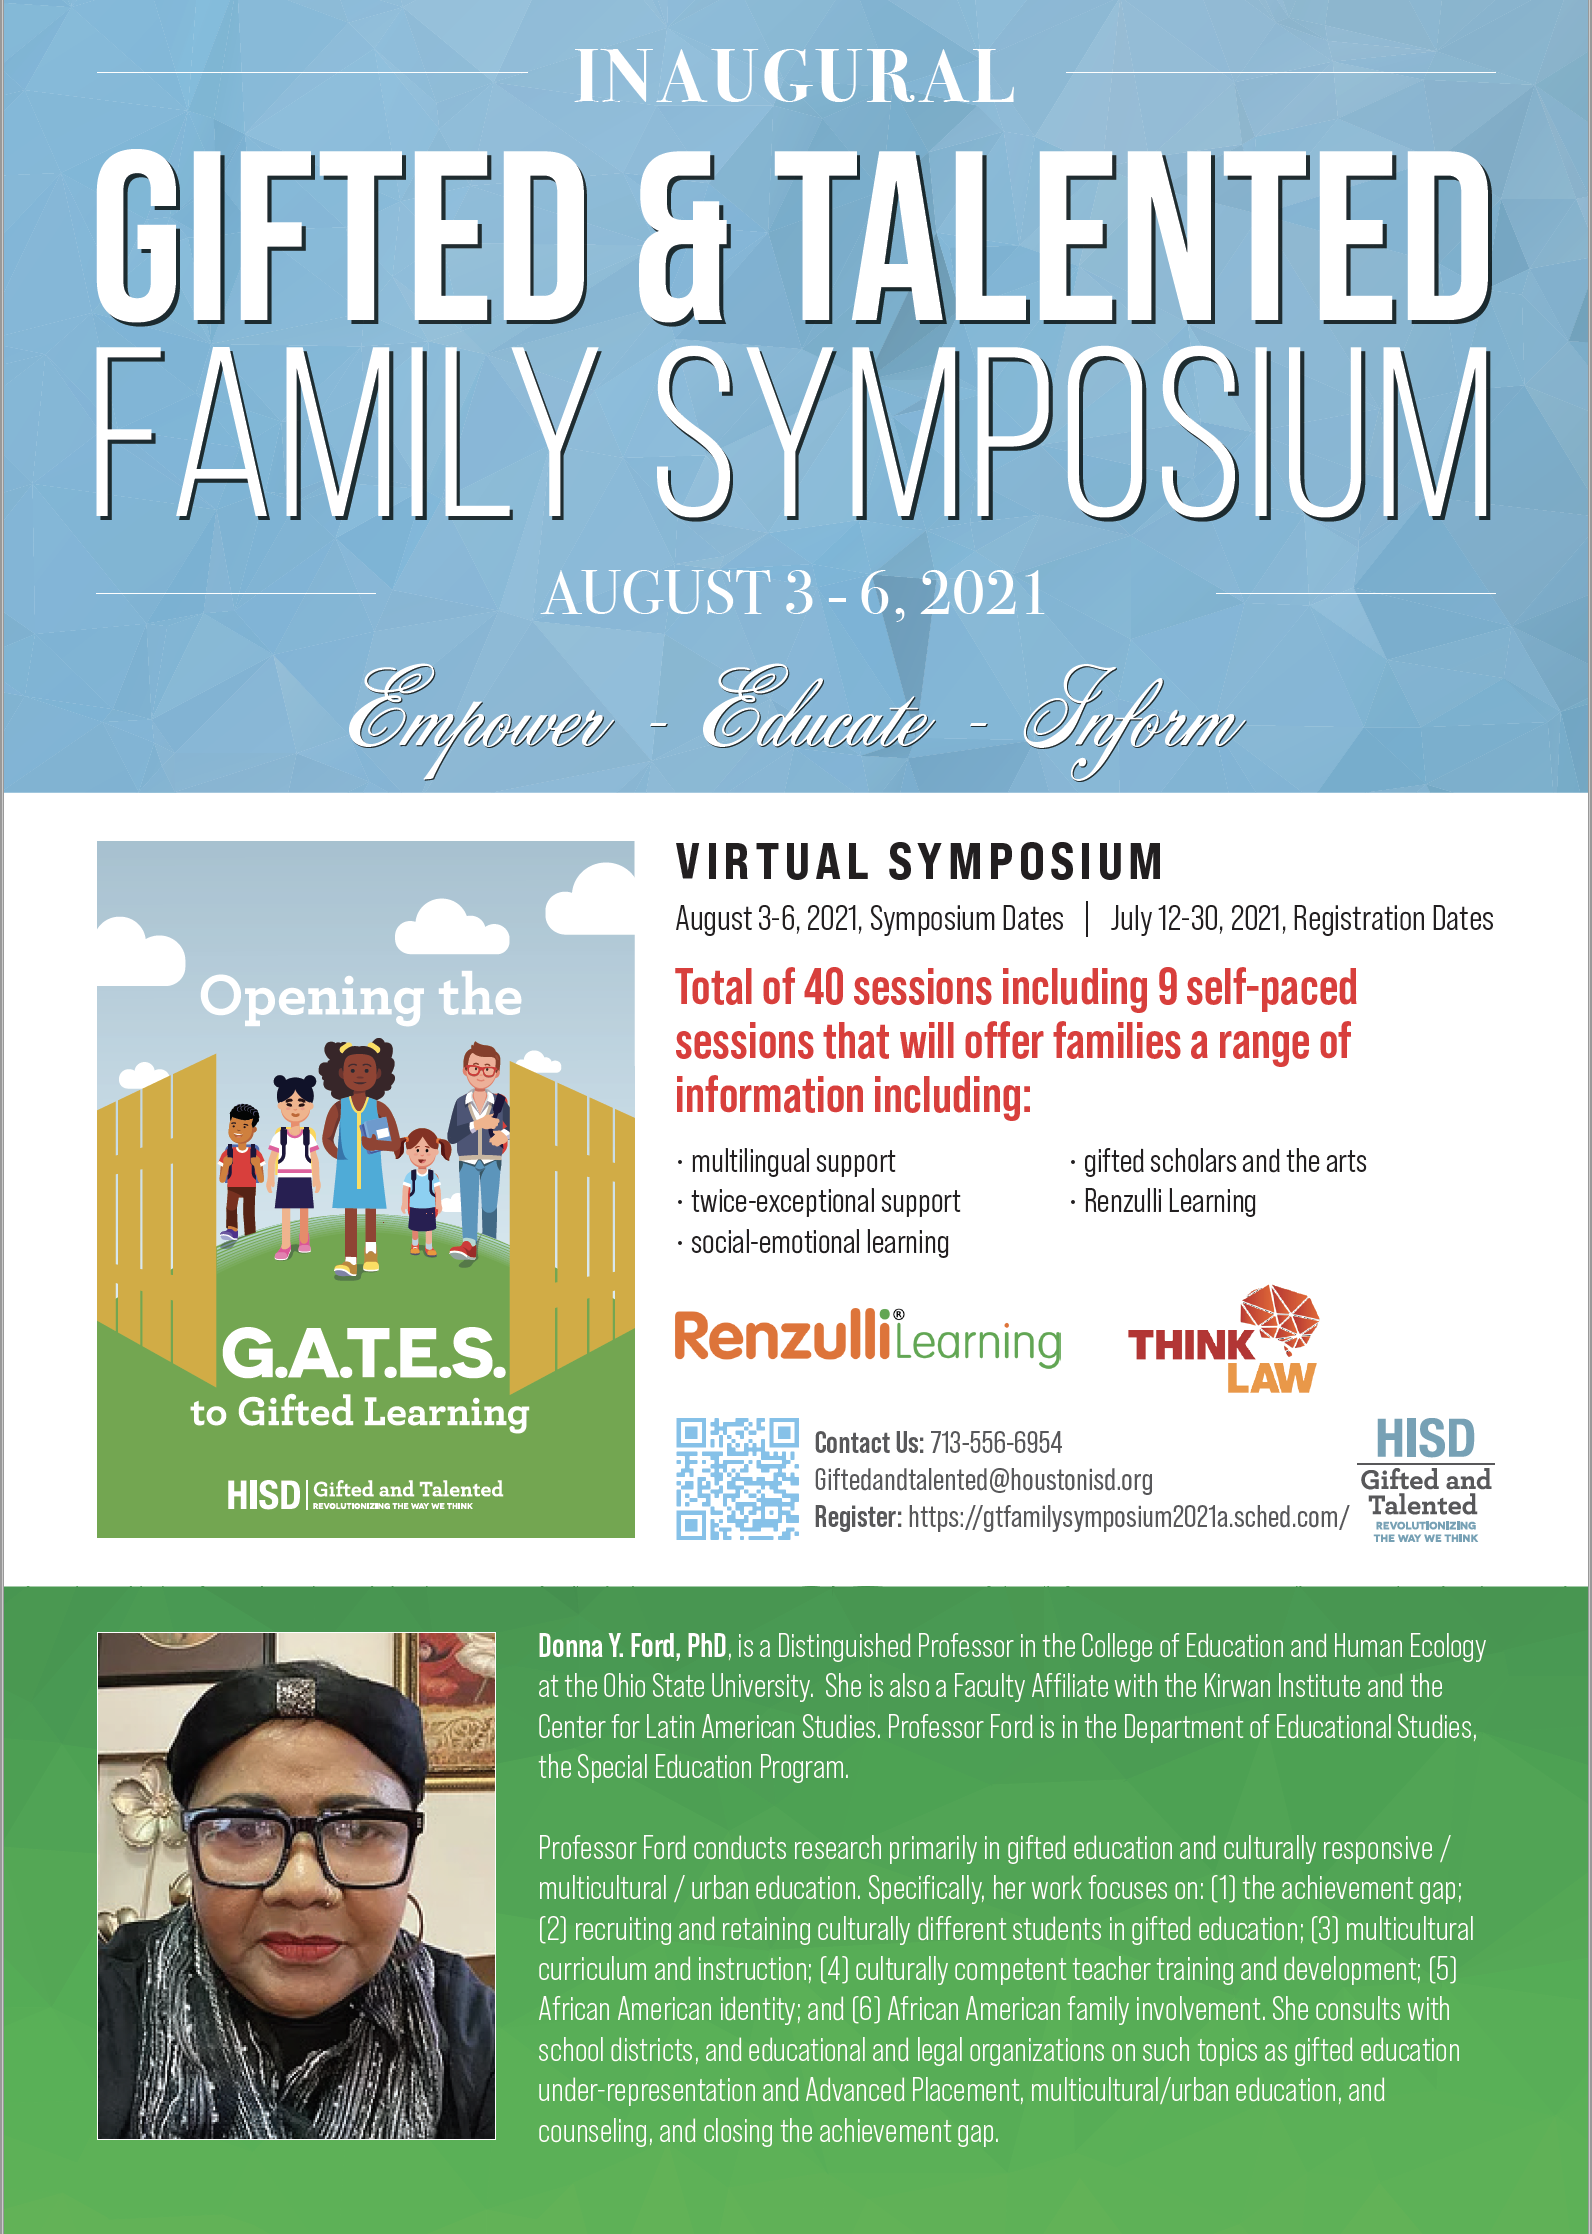 HISD Gifted and Talented hosting inaugural family symposium News Blog